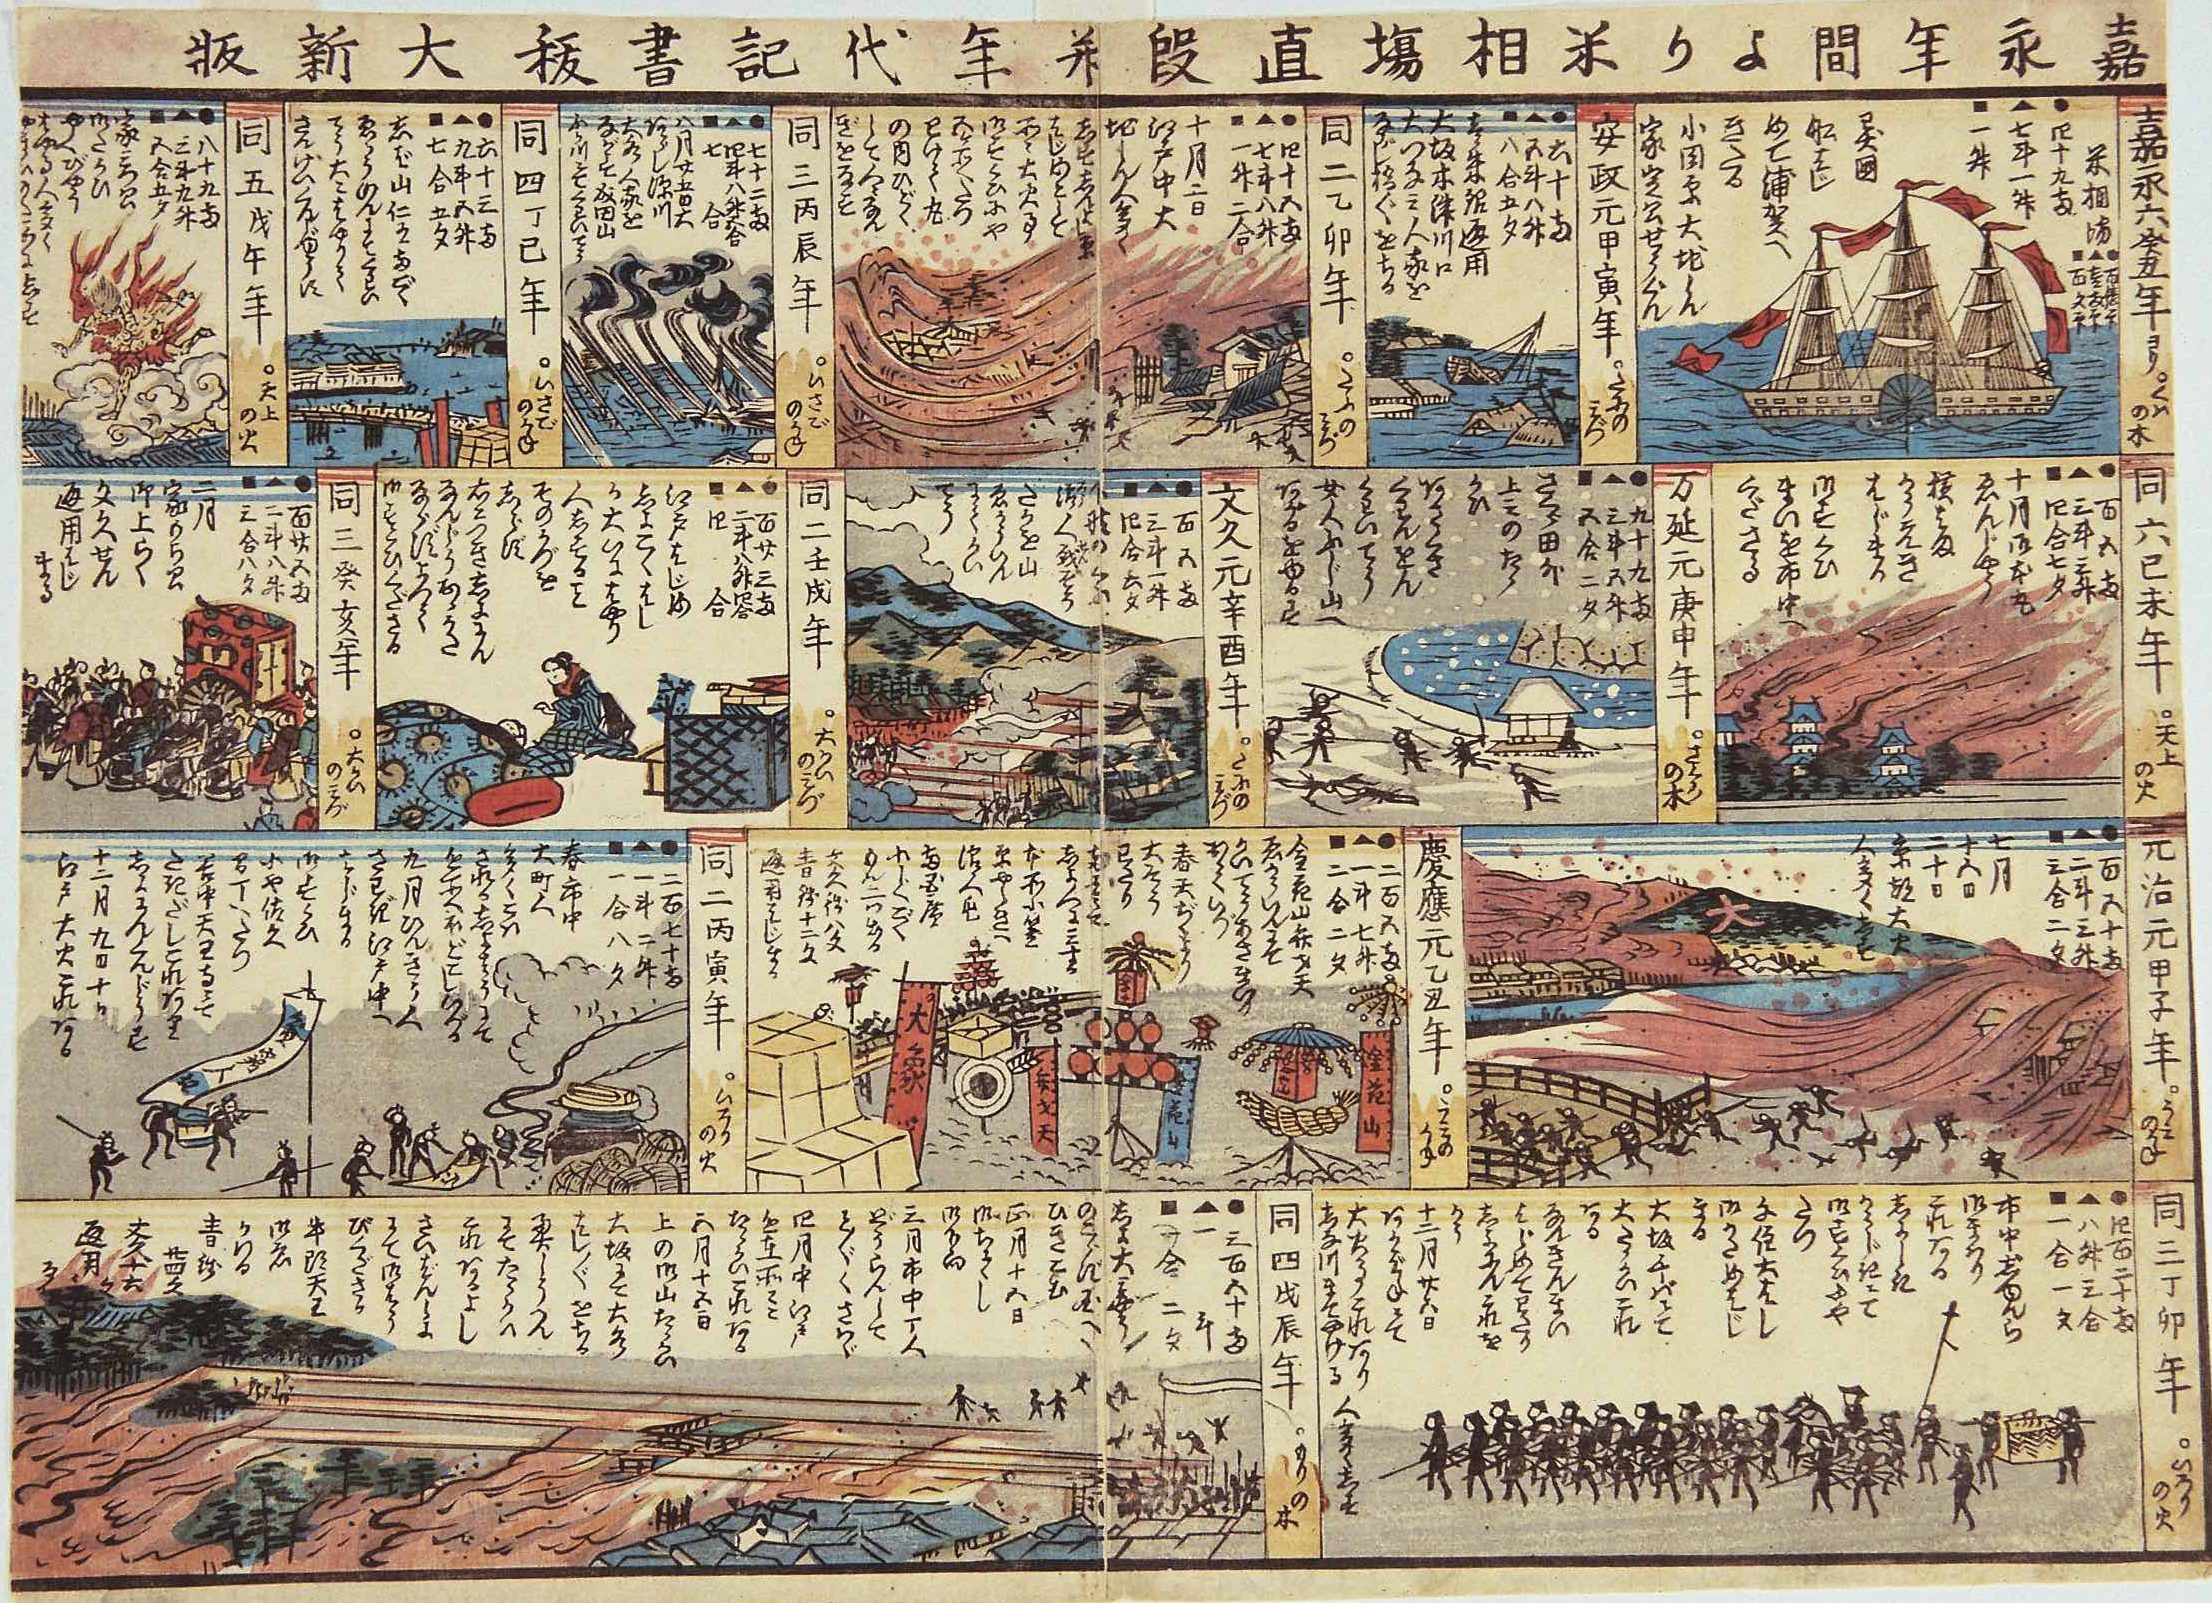 A contemporary series of illustrated panels depicting events that impacted the Japanese rice market between 1853 to 1868.